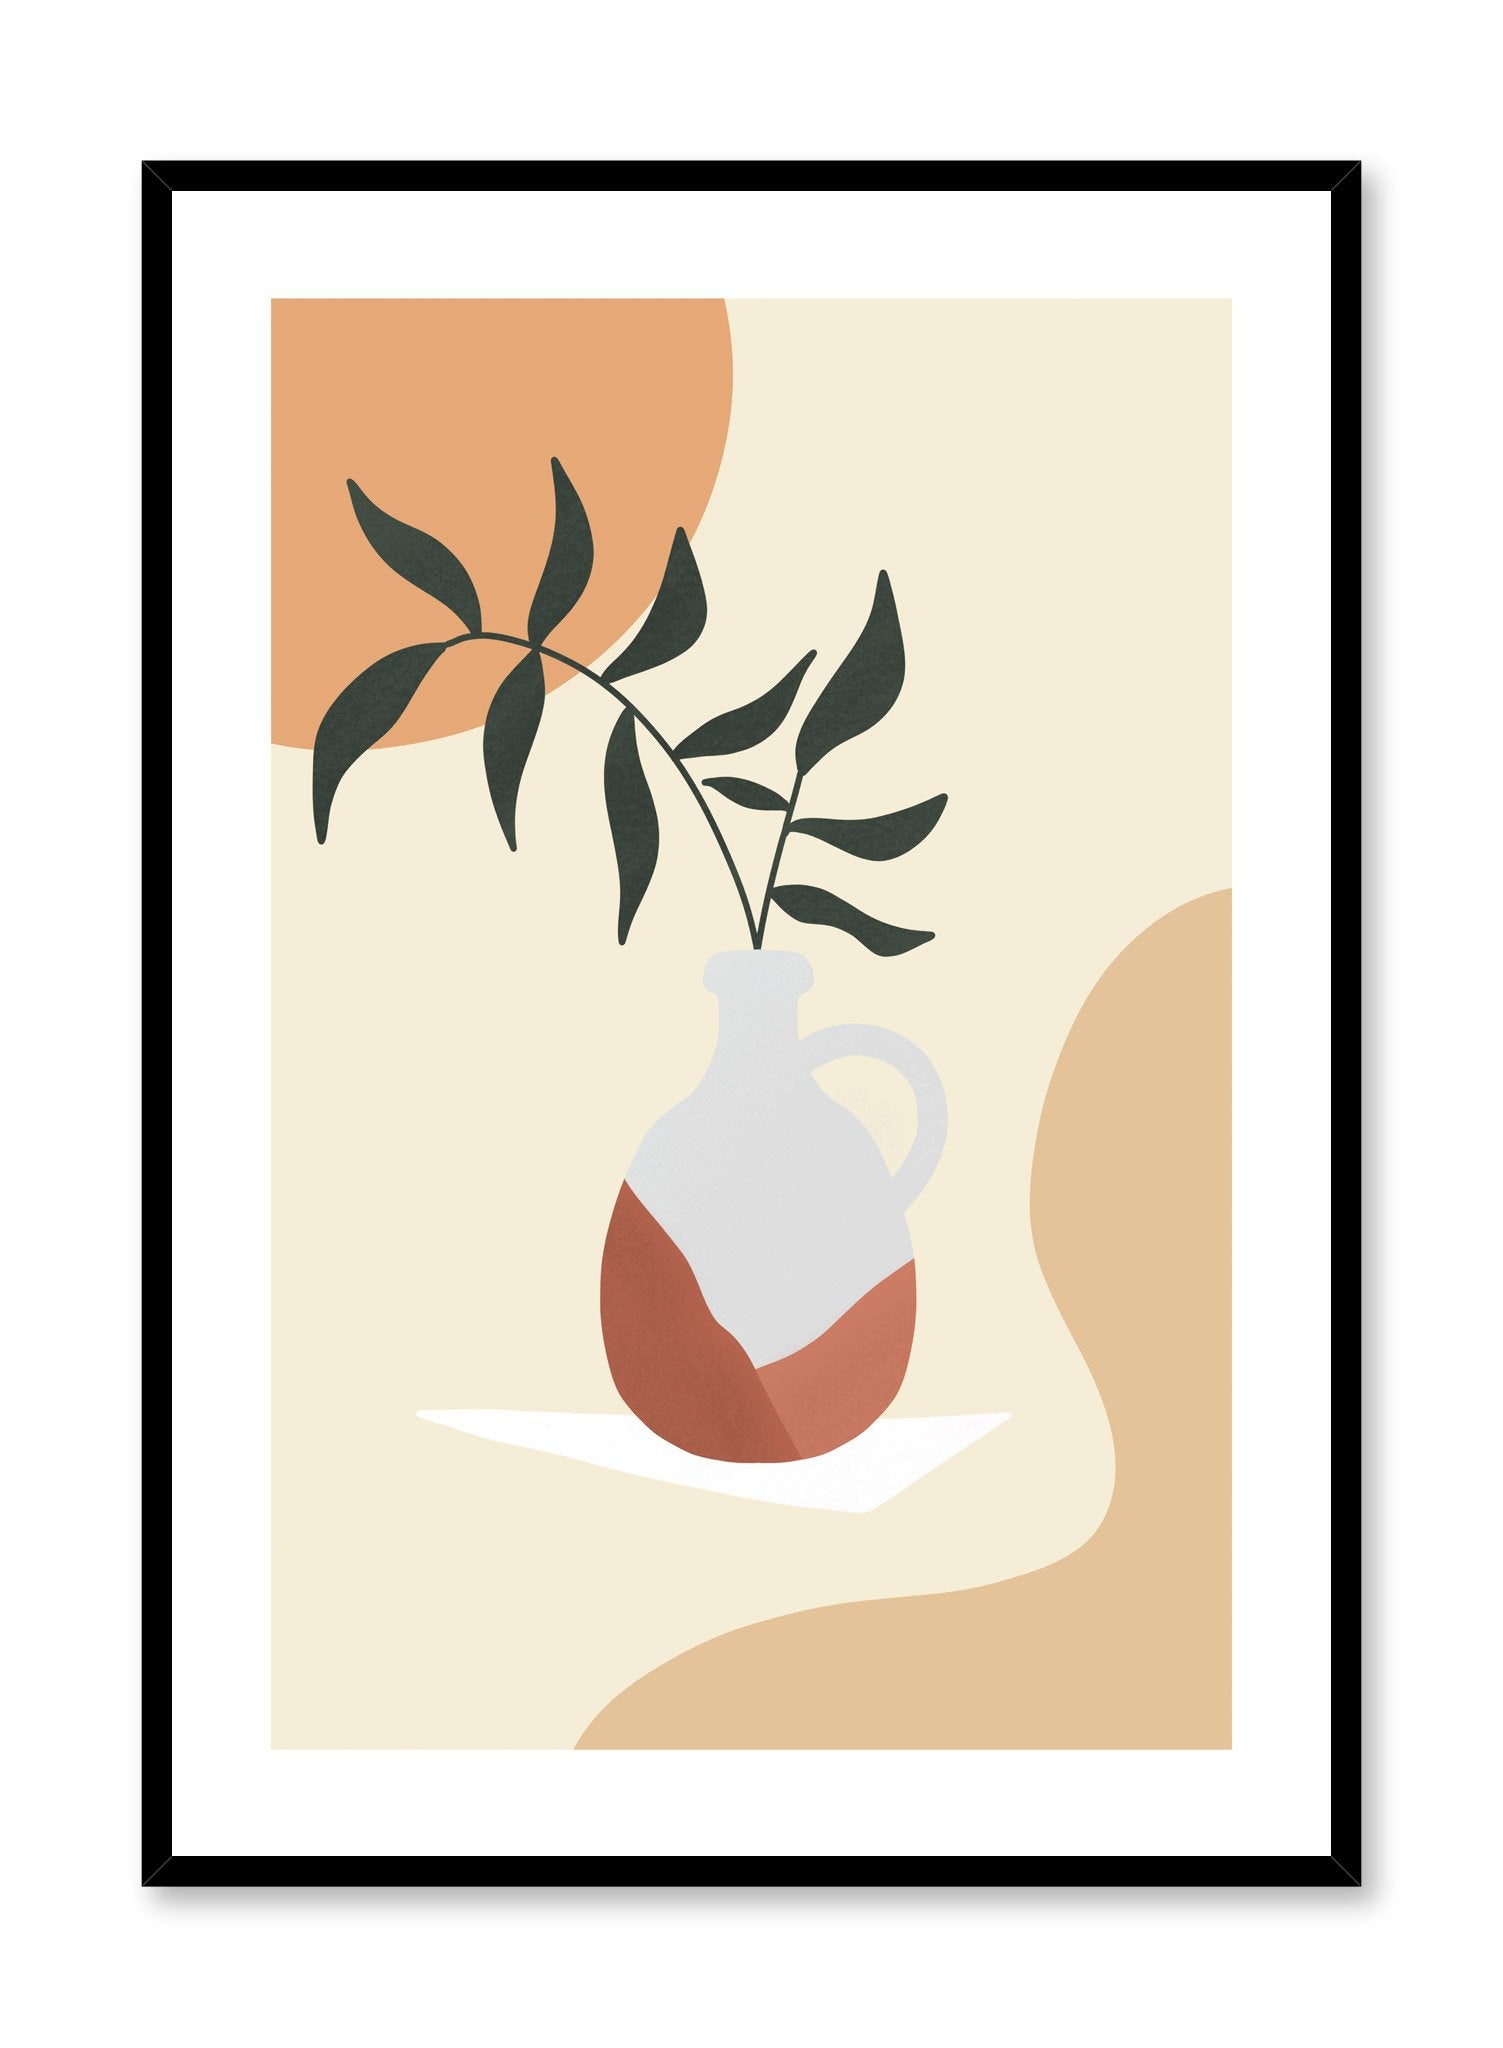 Mid-century modern illustration poster by Opposite Wall with leaves in vase